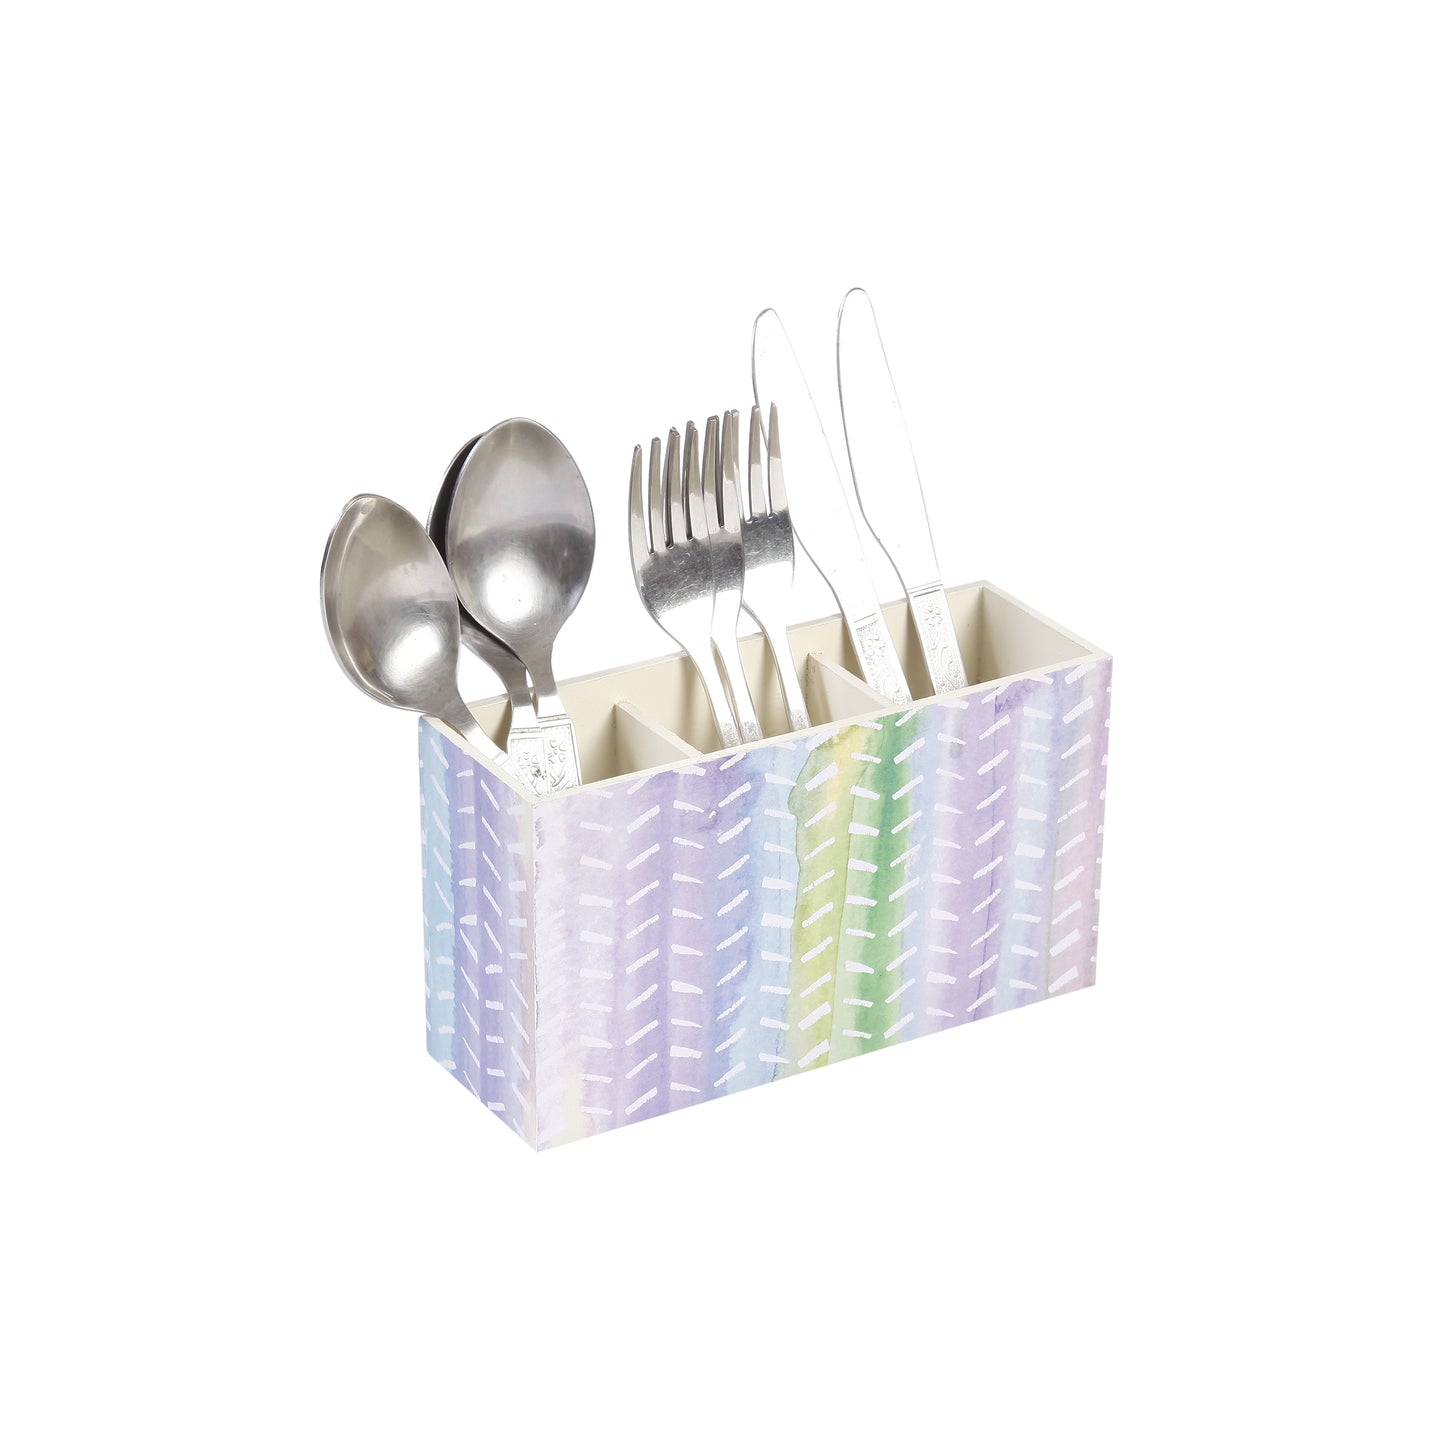 A Tiny Mistake Pastel Leaves Wooden Cutlery Holder, 18 x 10 x 6.5 cm